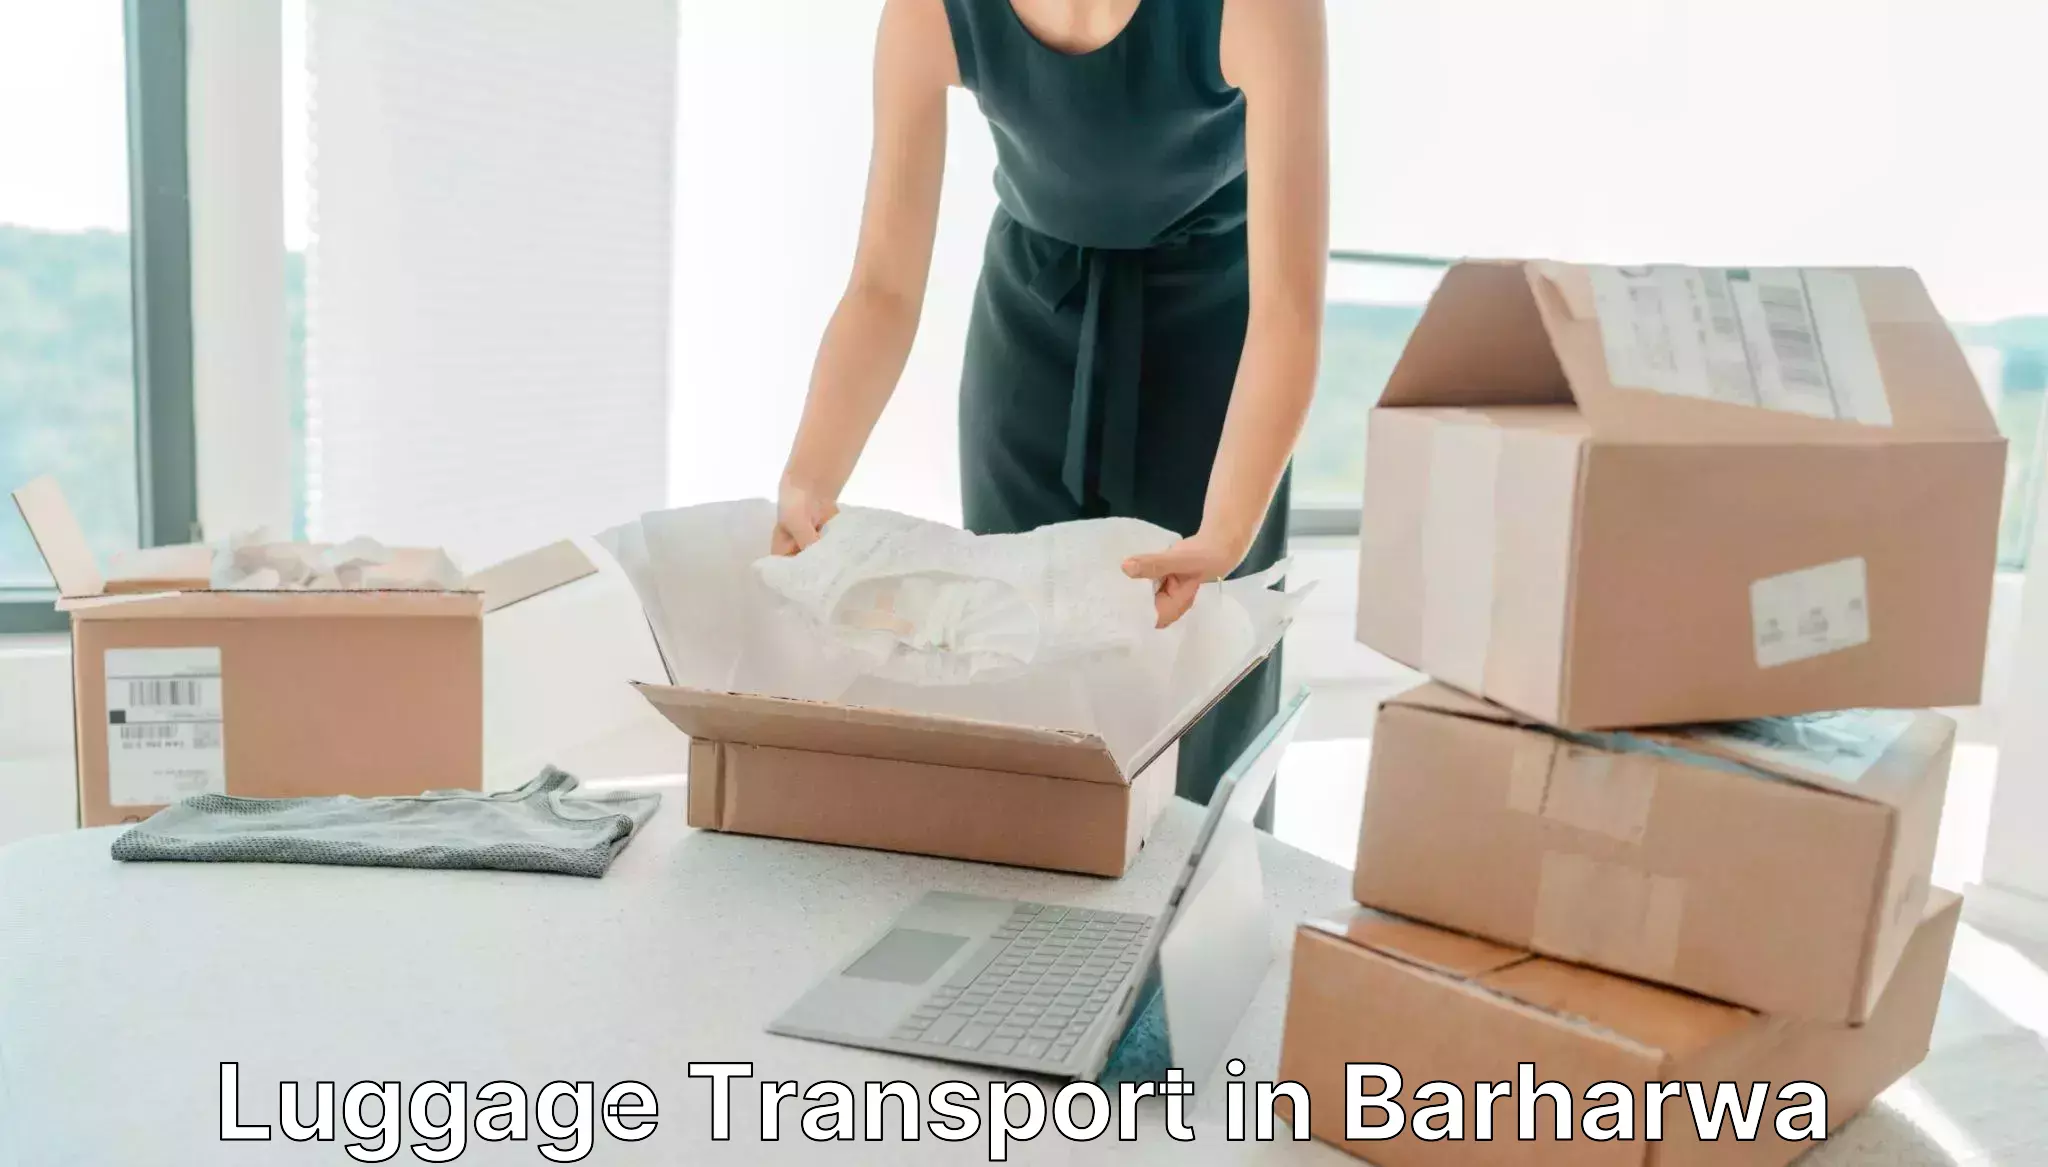 Online luggage shipping booking in Barharwa